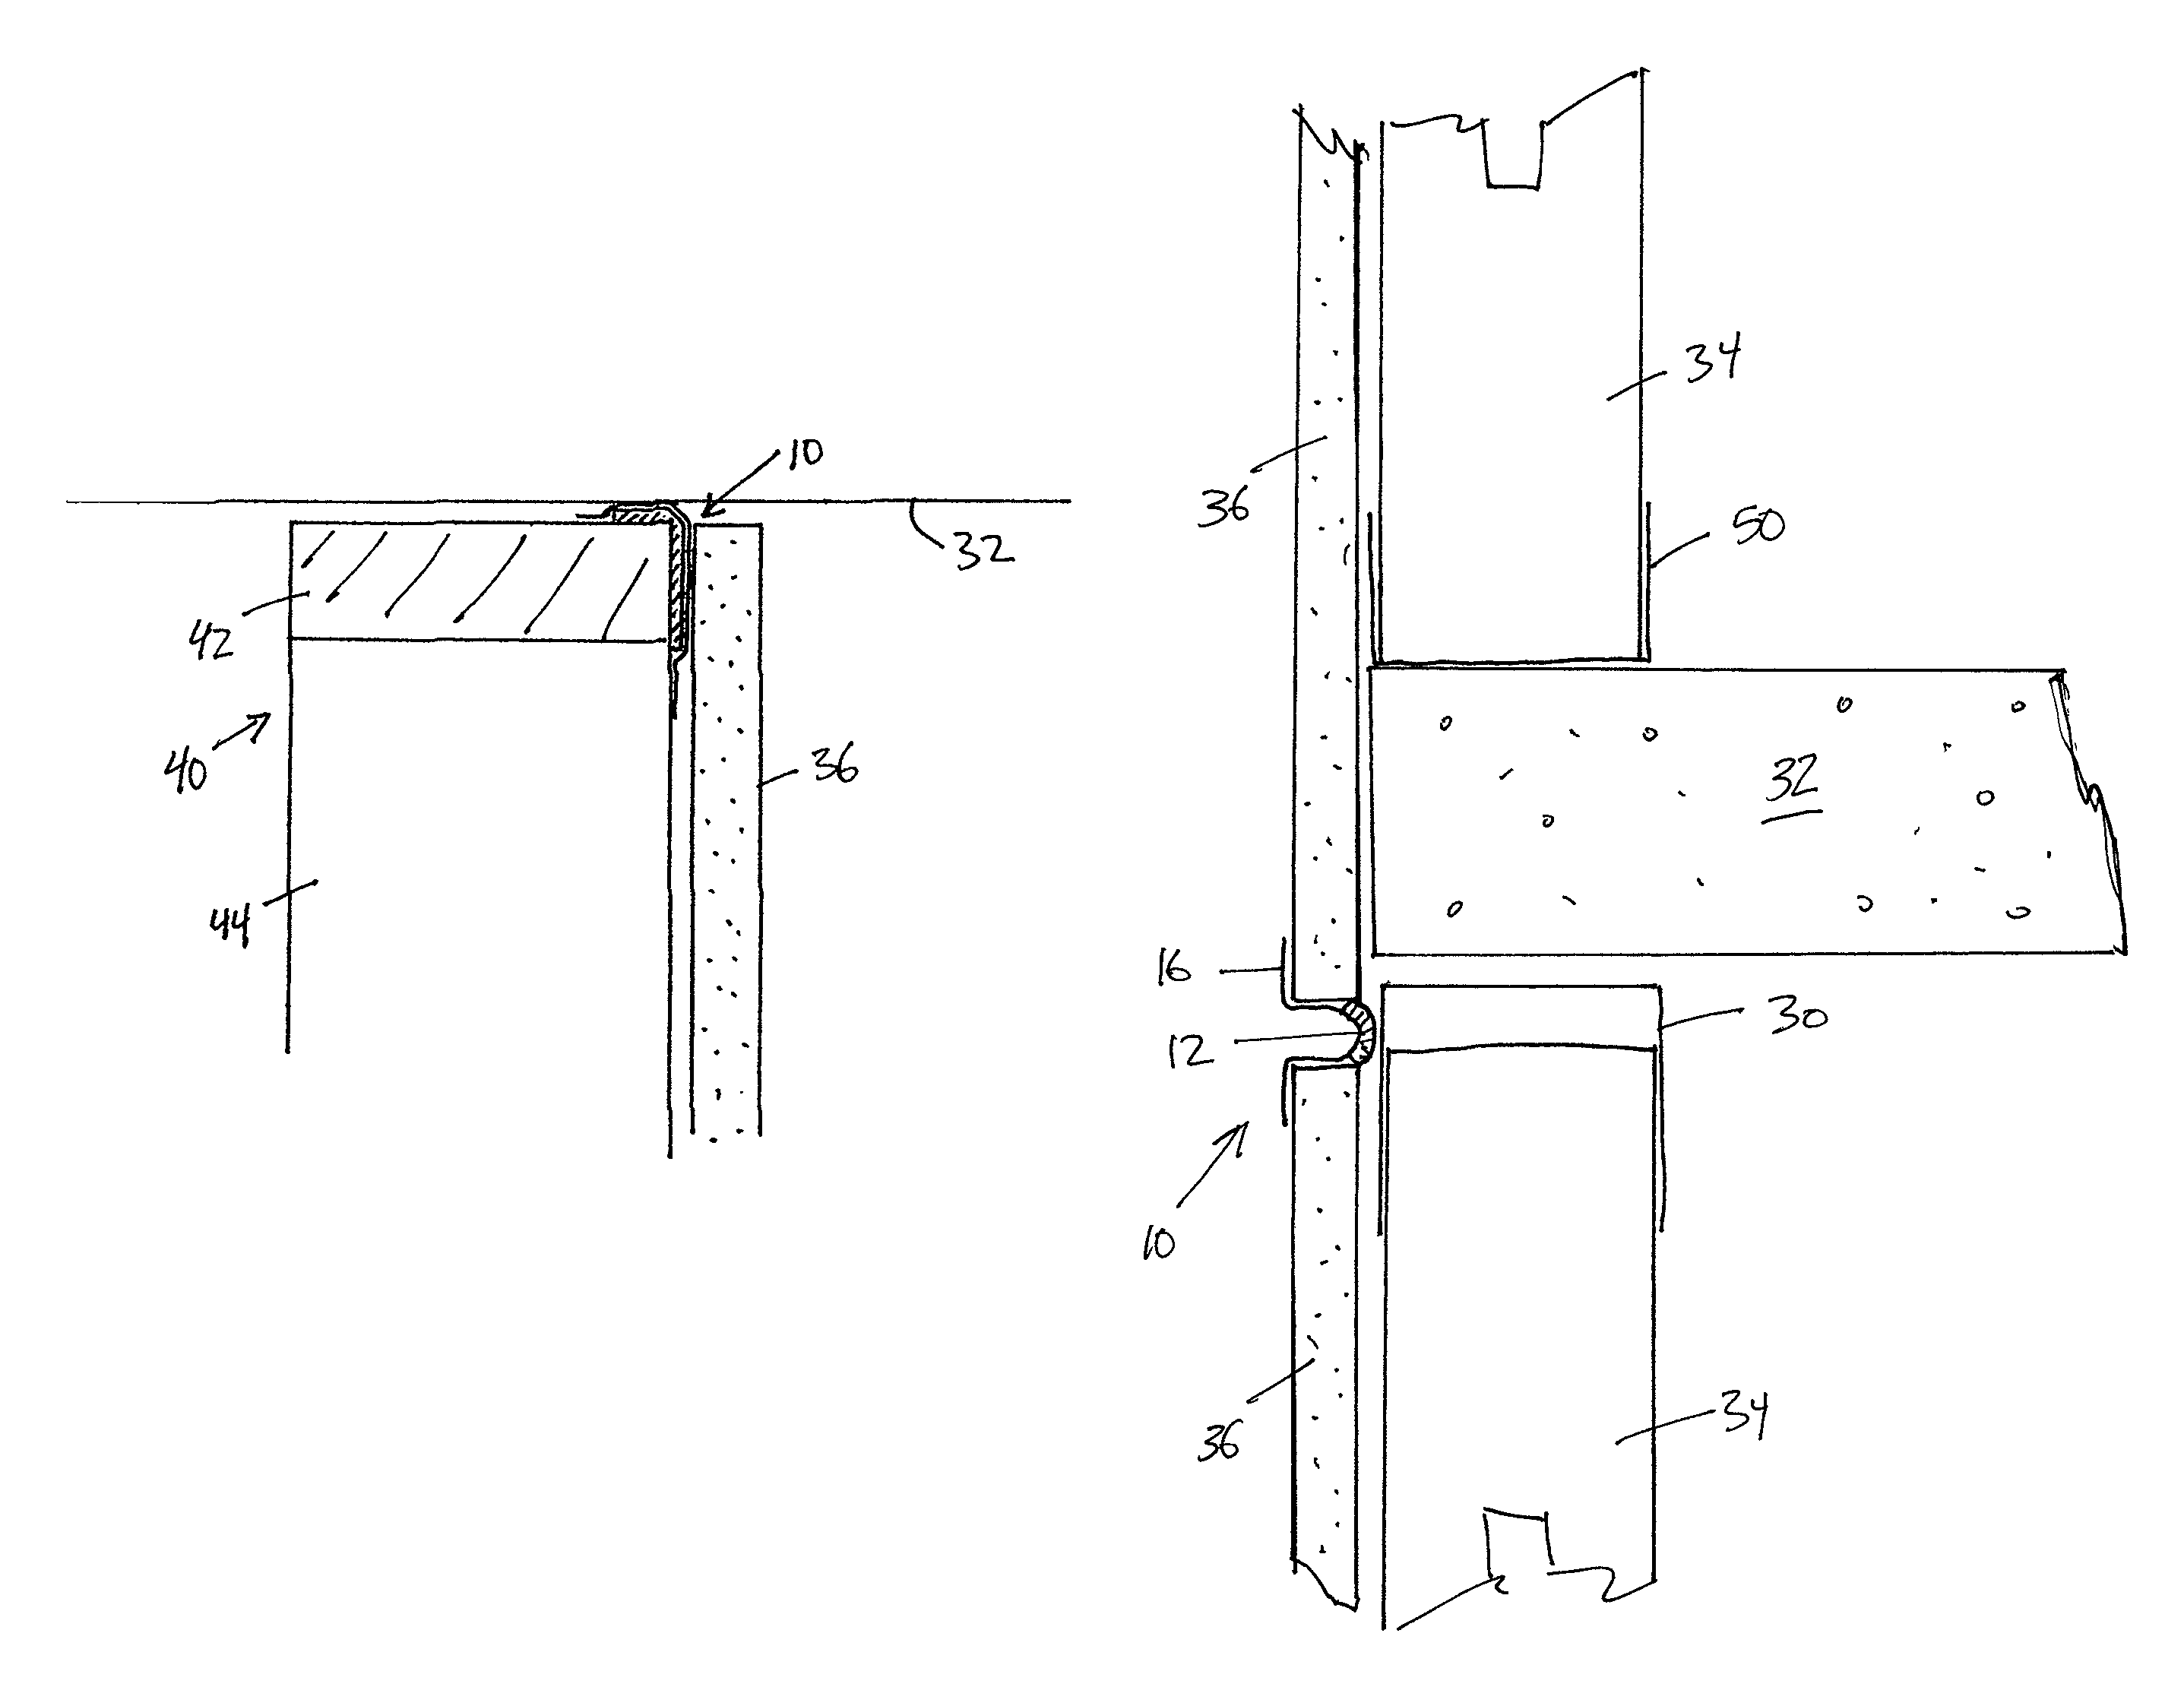 Wall gap fire block device, system and method